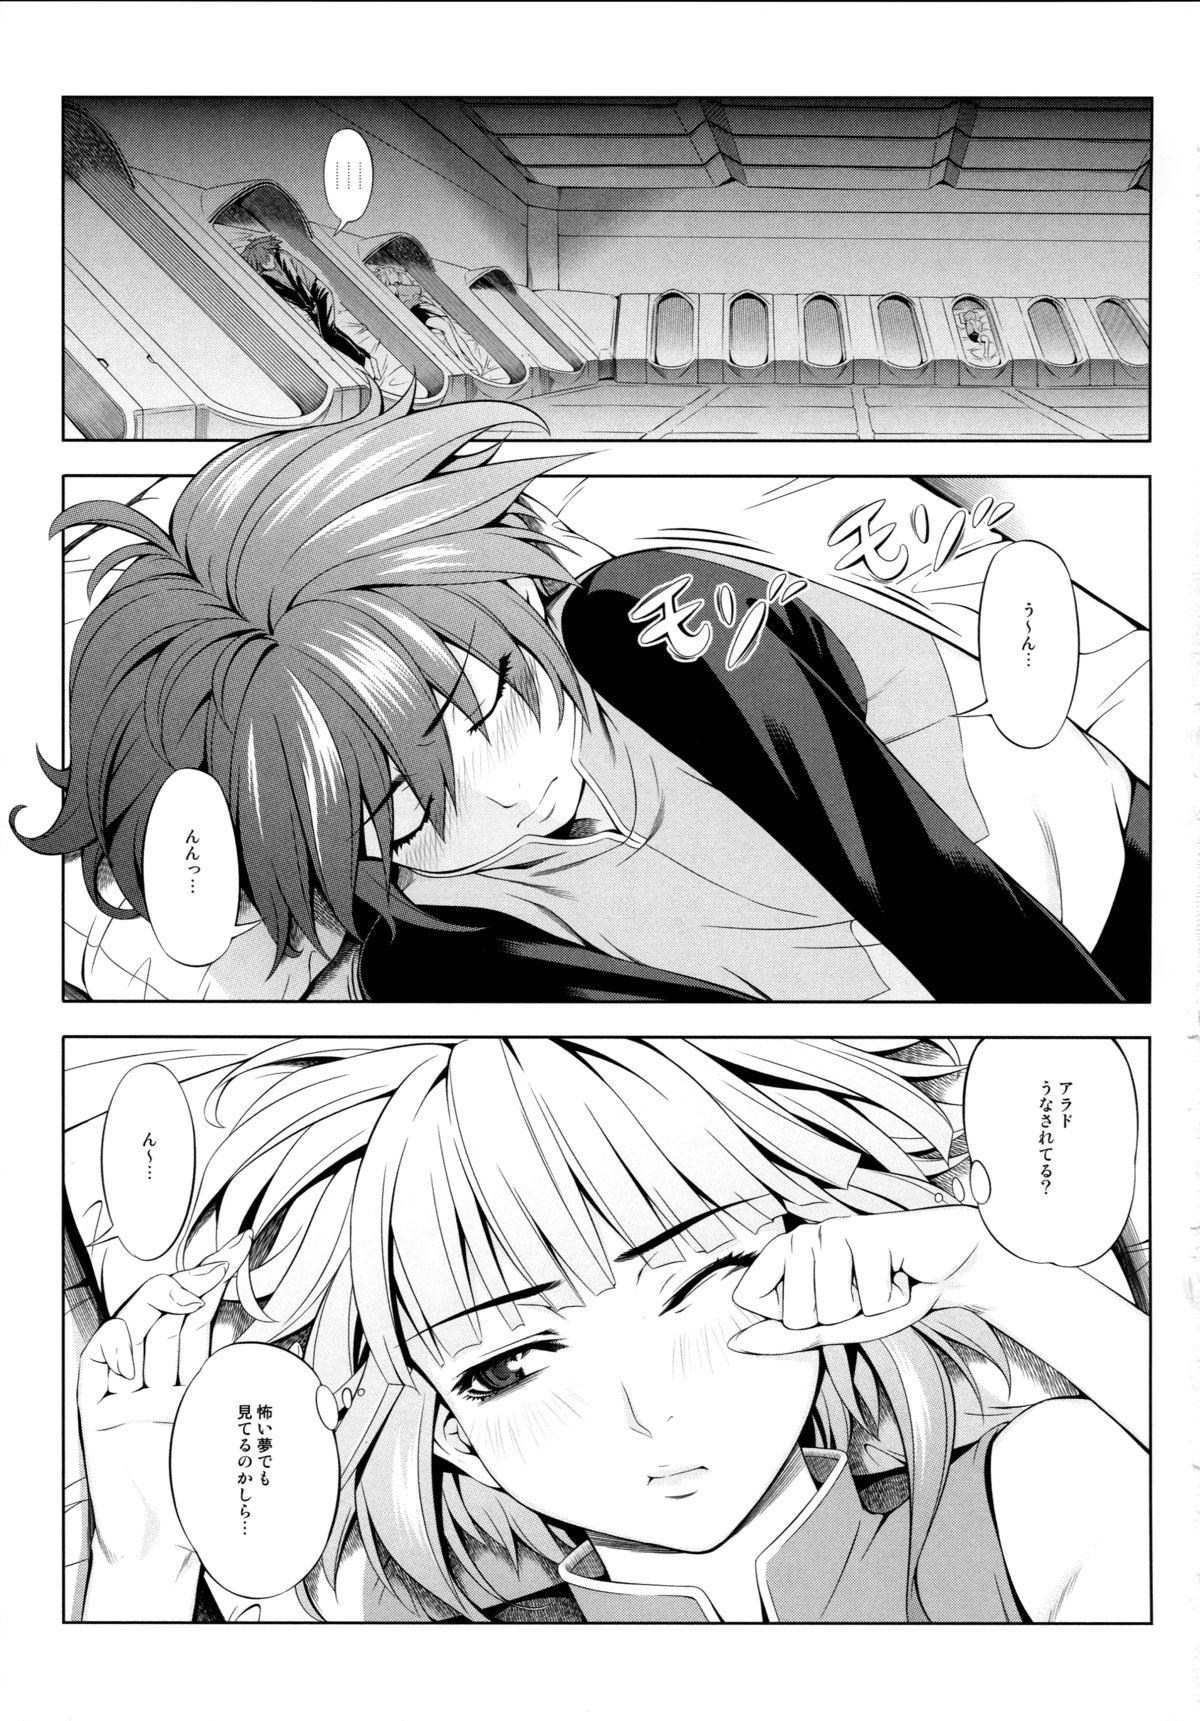 Kissing ouka of book - Super robot wars Mother fuck - Page 5